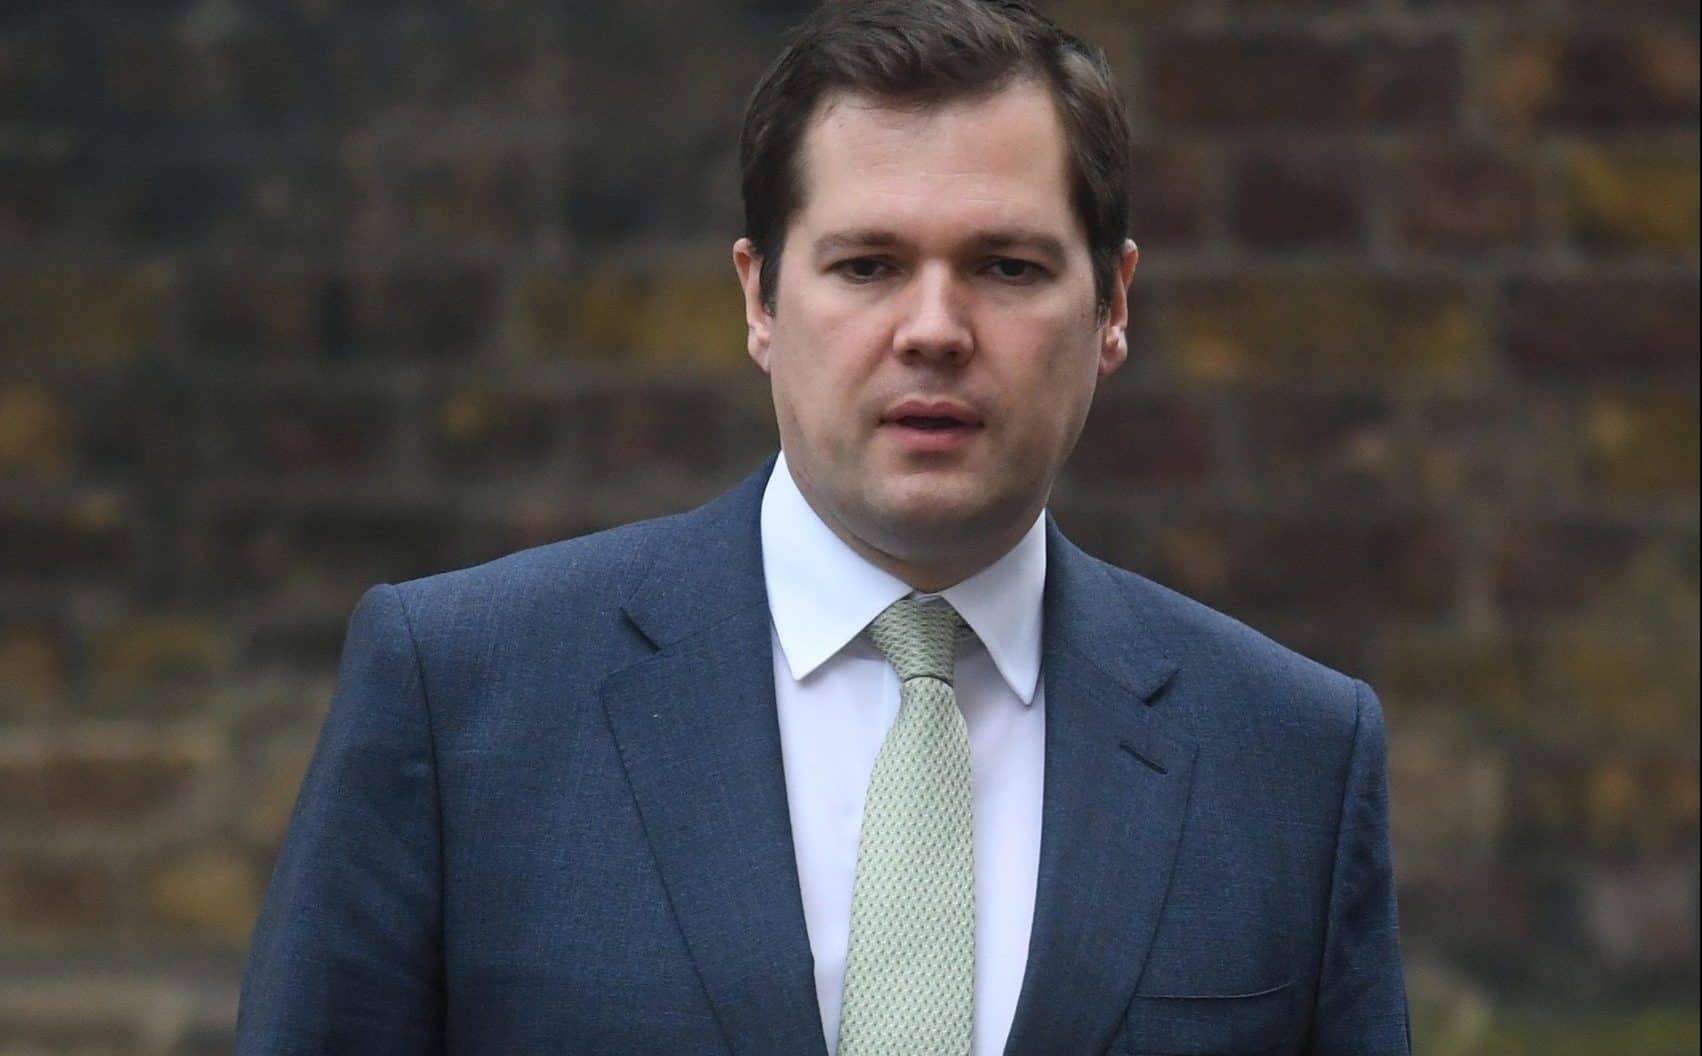 Robert Jenrick has claimed £100k expenses for country manor